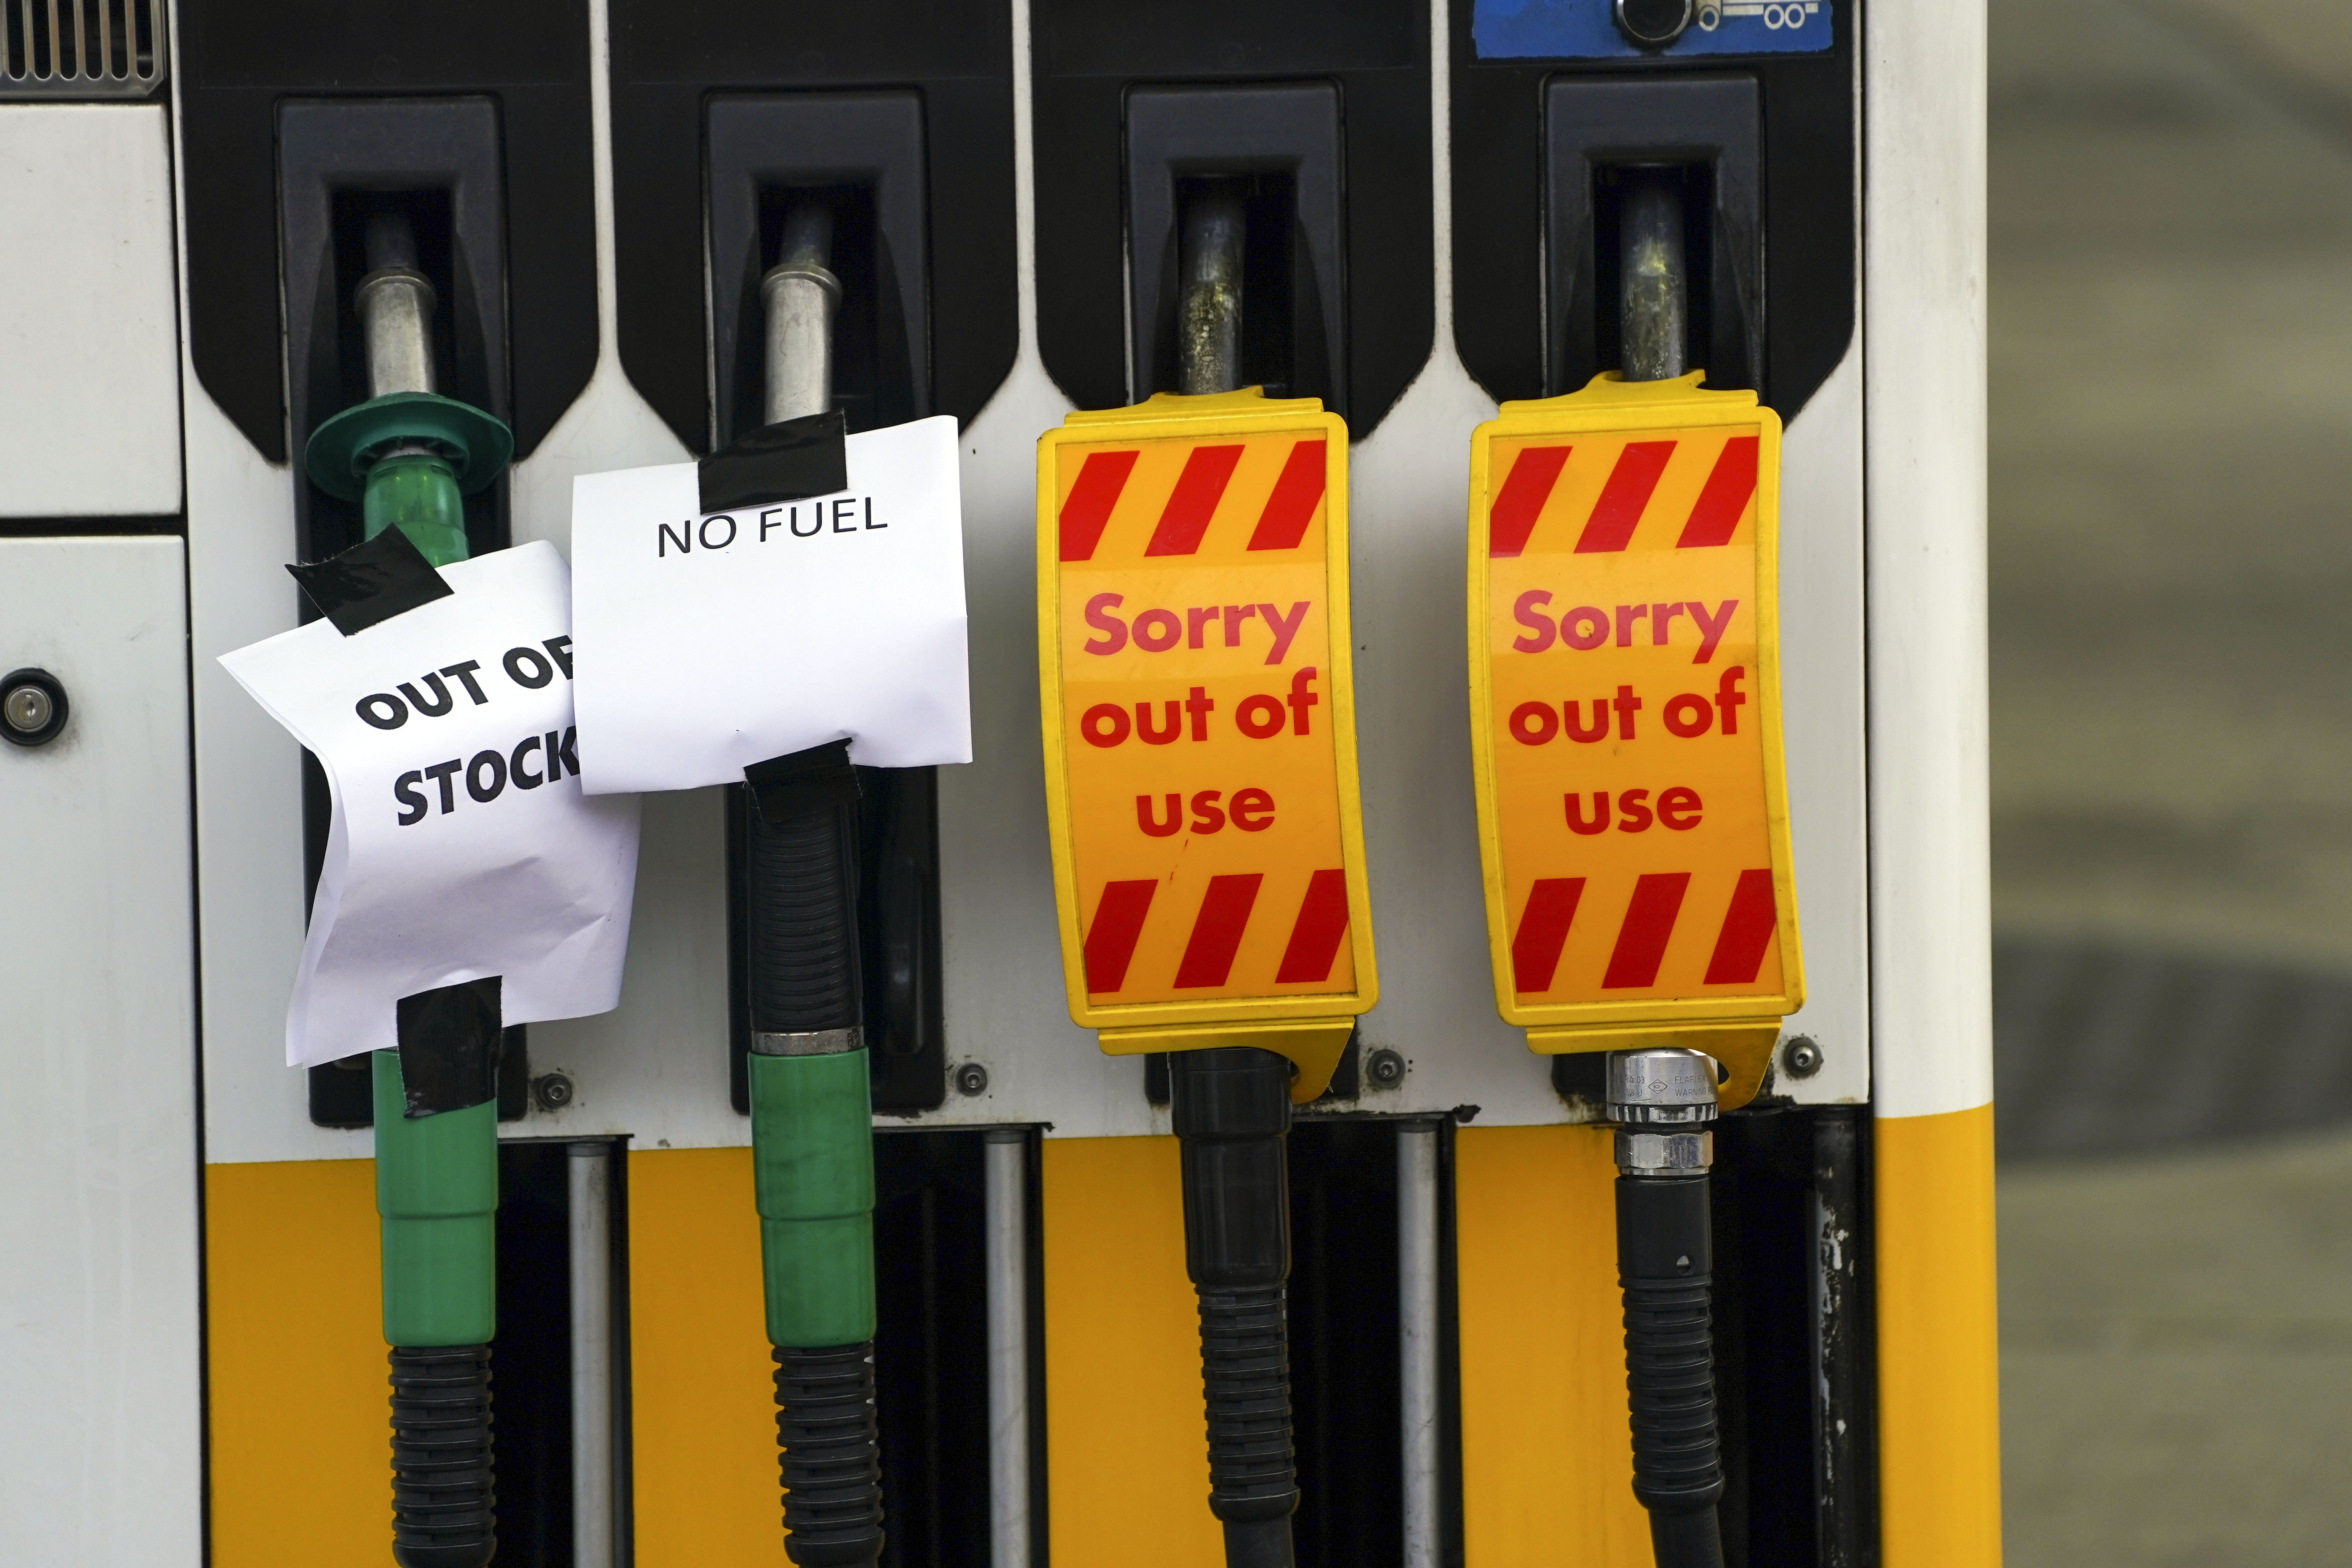 The Petrol Retailers Association (PRA) reported that up to 90 per cent of its independent members were out of fuel in some areas, after oil giant BP said one-third of its sites had no supplies